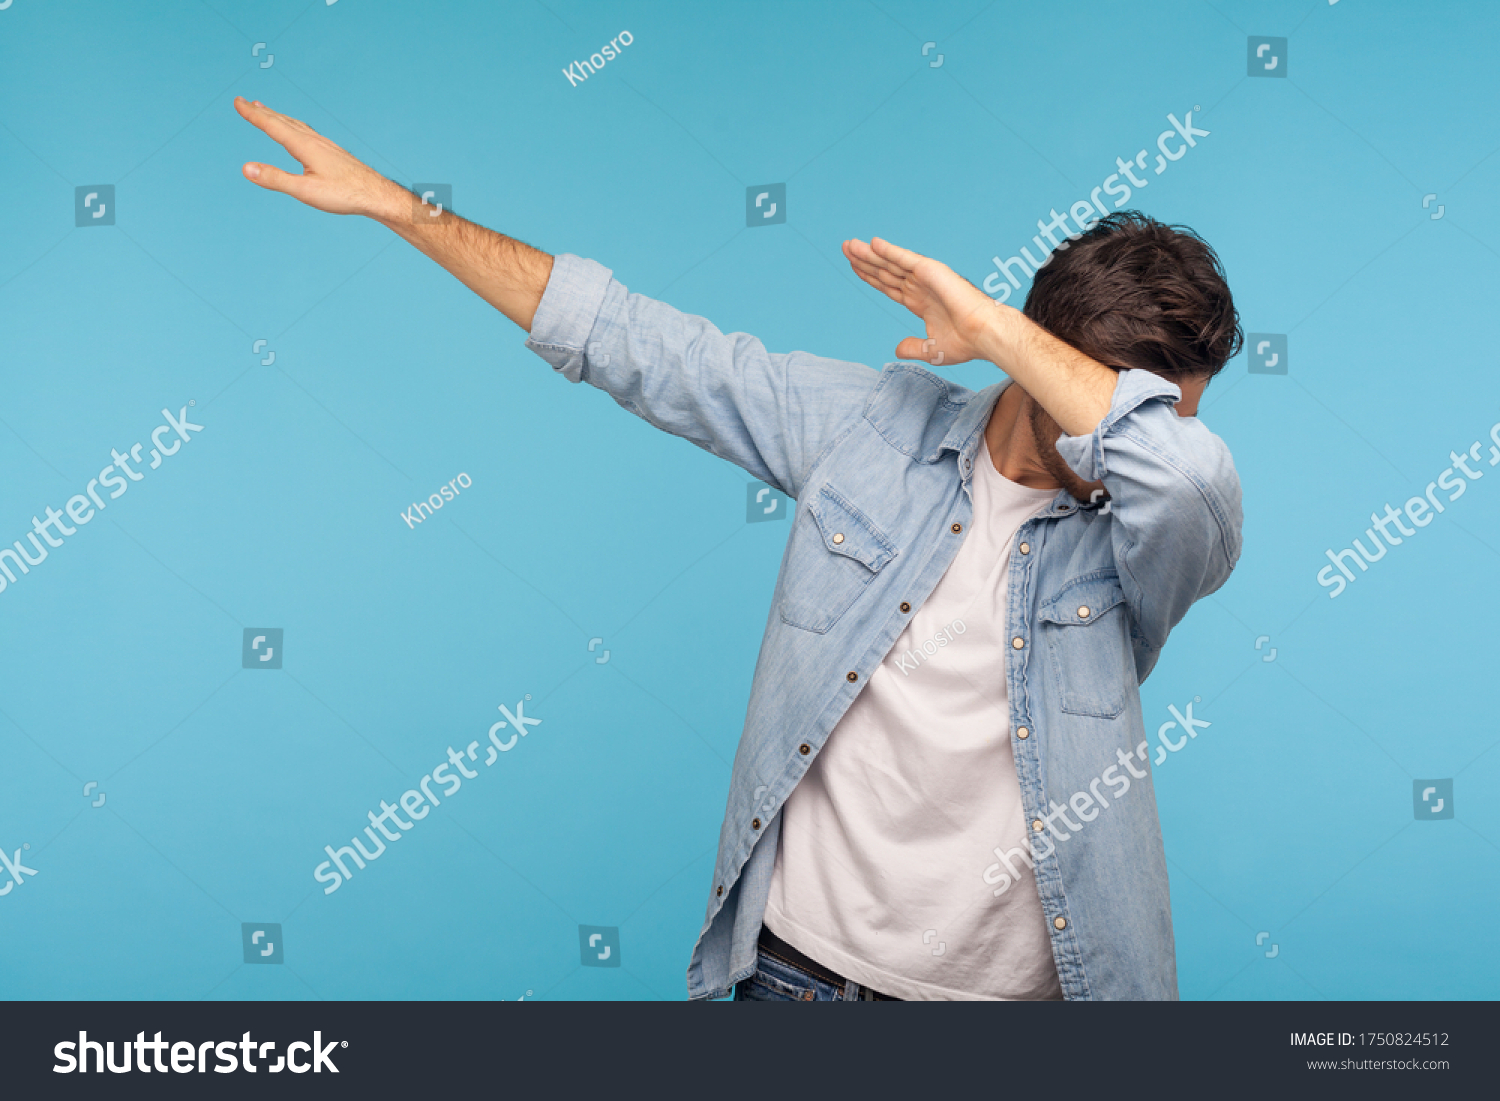 Dab dance. Portrait of man in denim shirt making dabbing movement, famous internet meme of success victory, expressing happiness and following trends. indoor studio shot isolated on blue background #1750824512